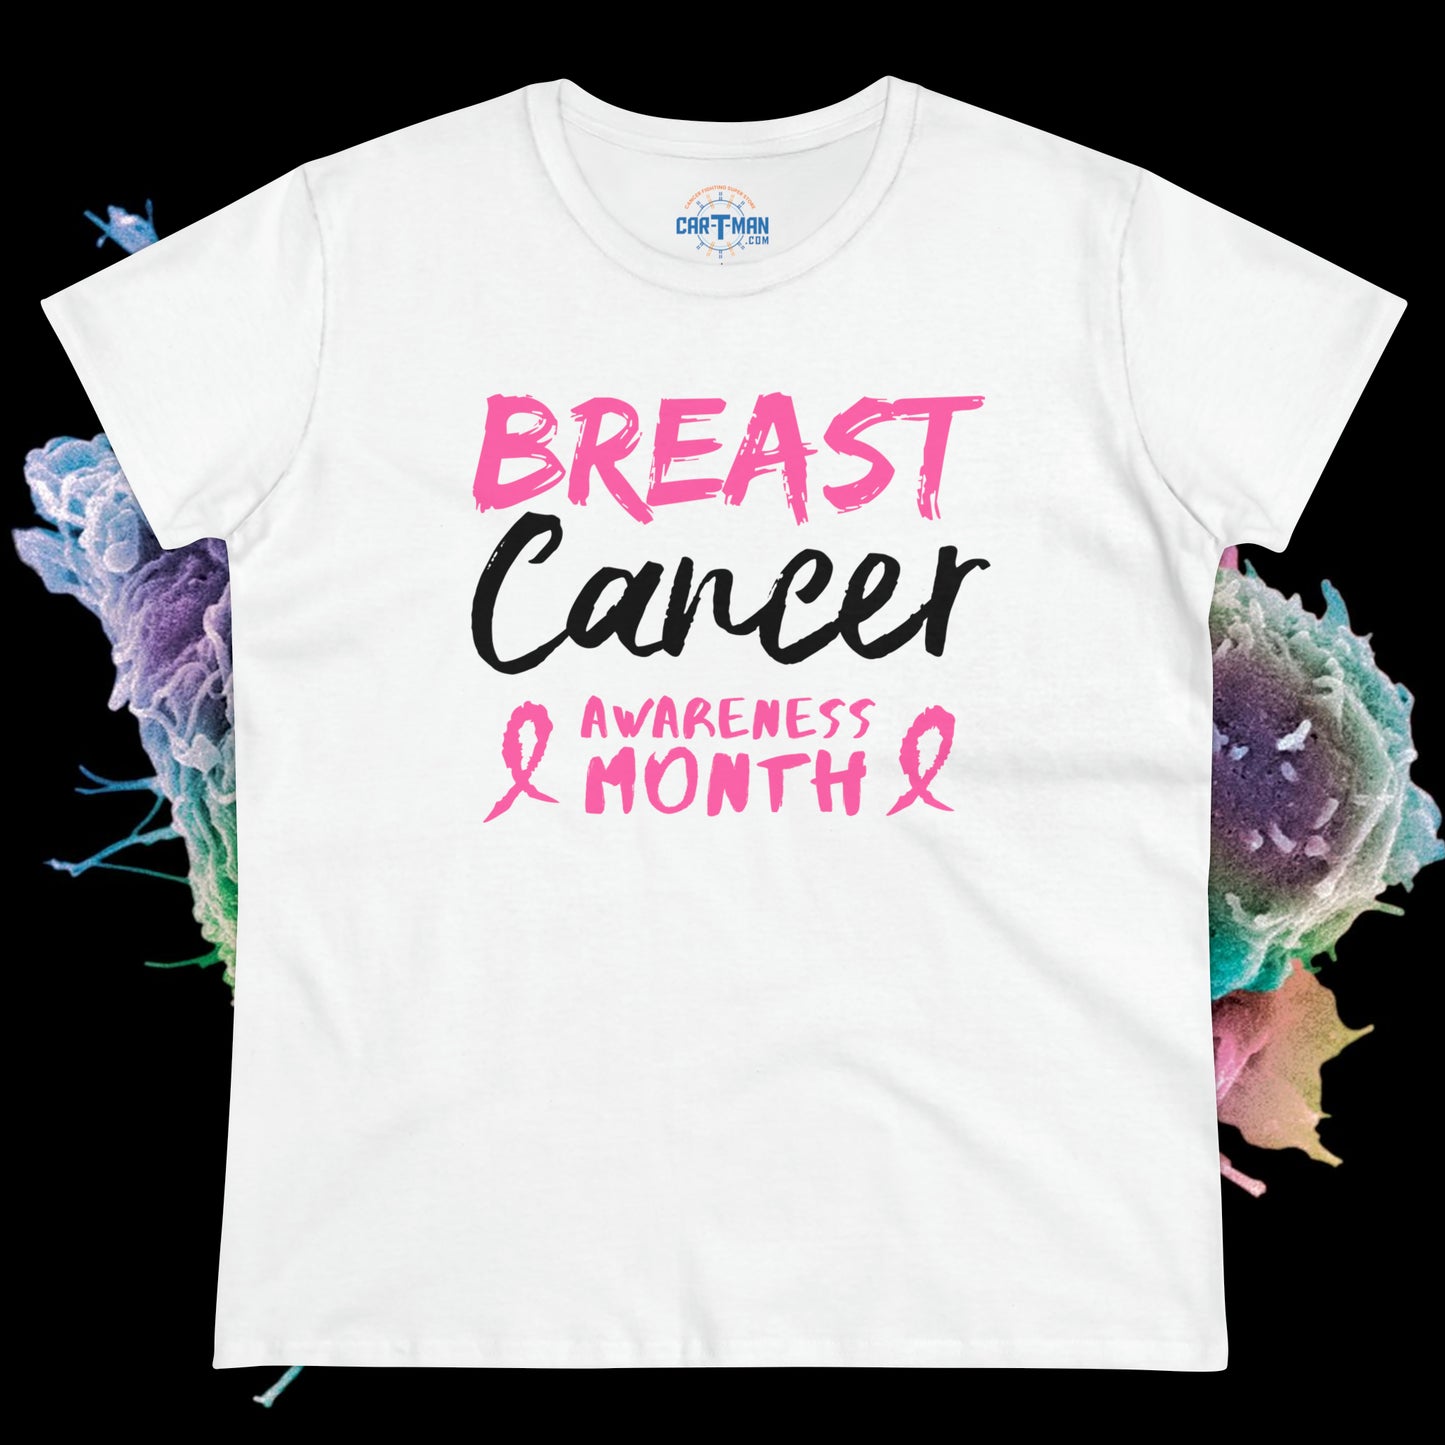 Breast Cancer Awareness Month Women's Midweight Cotton Tee